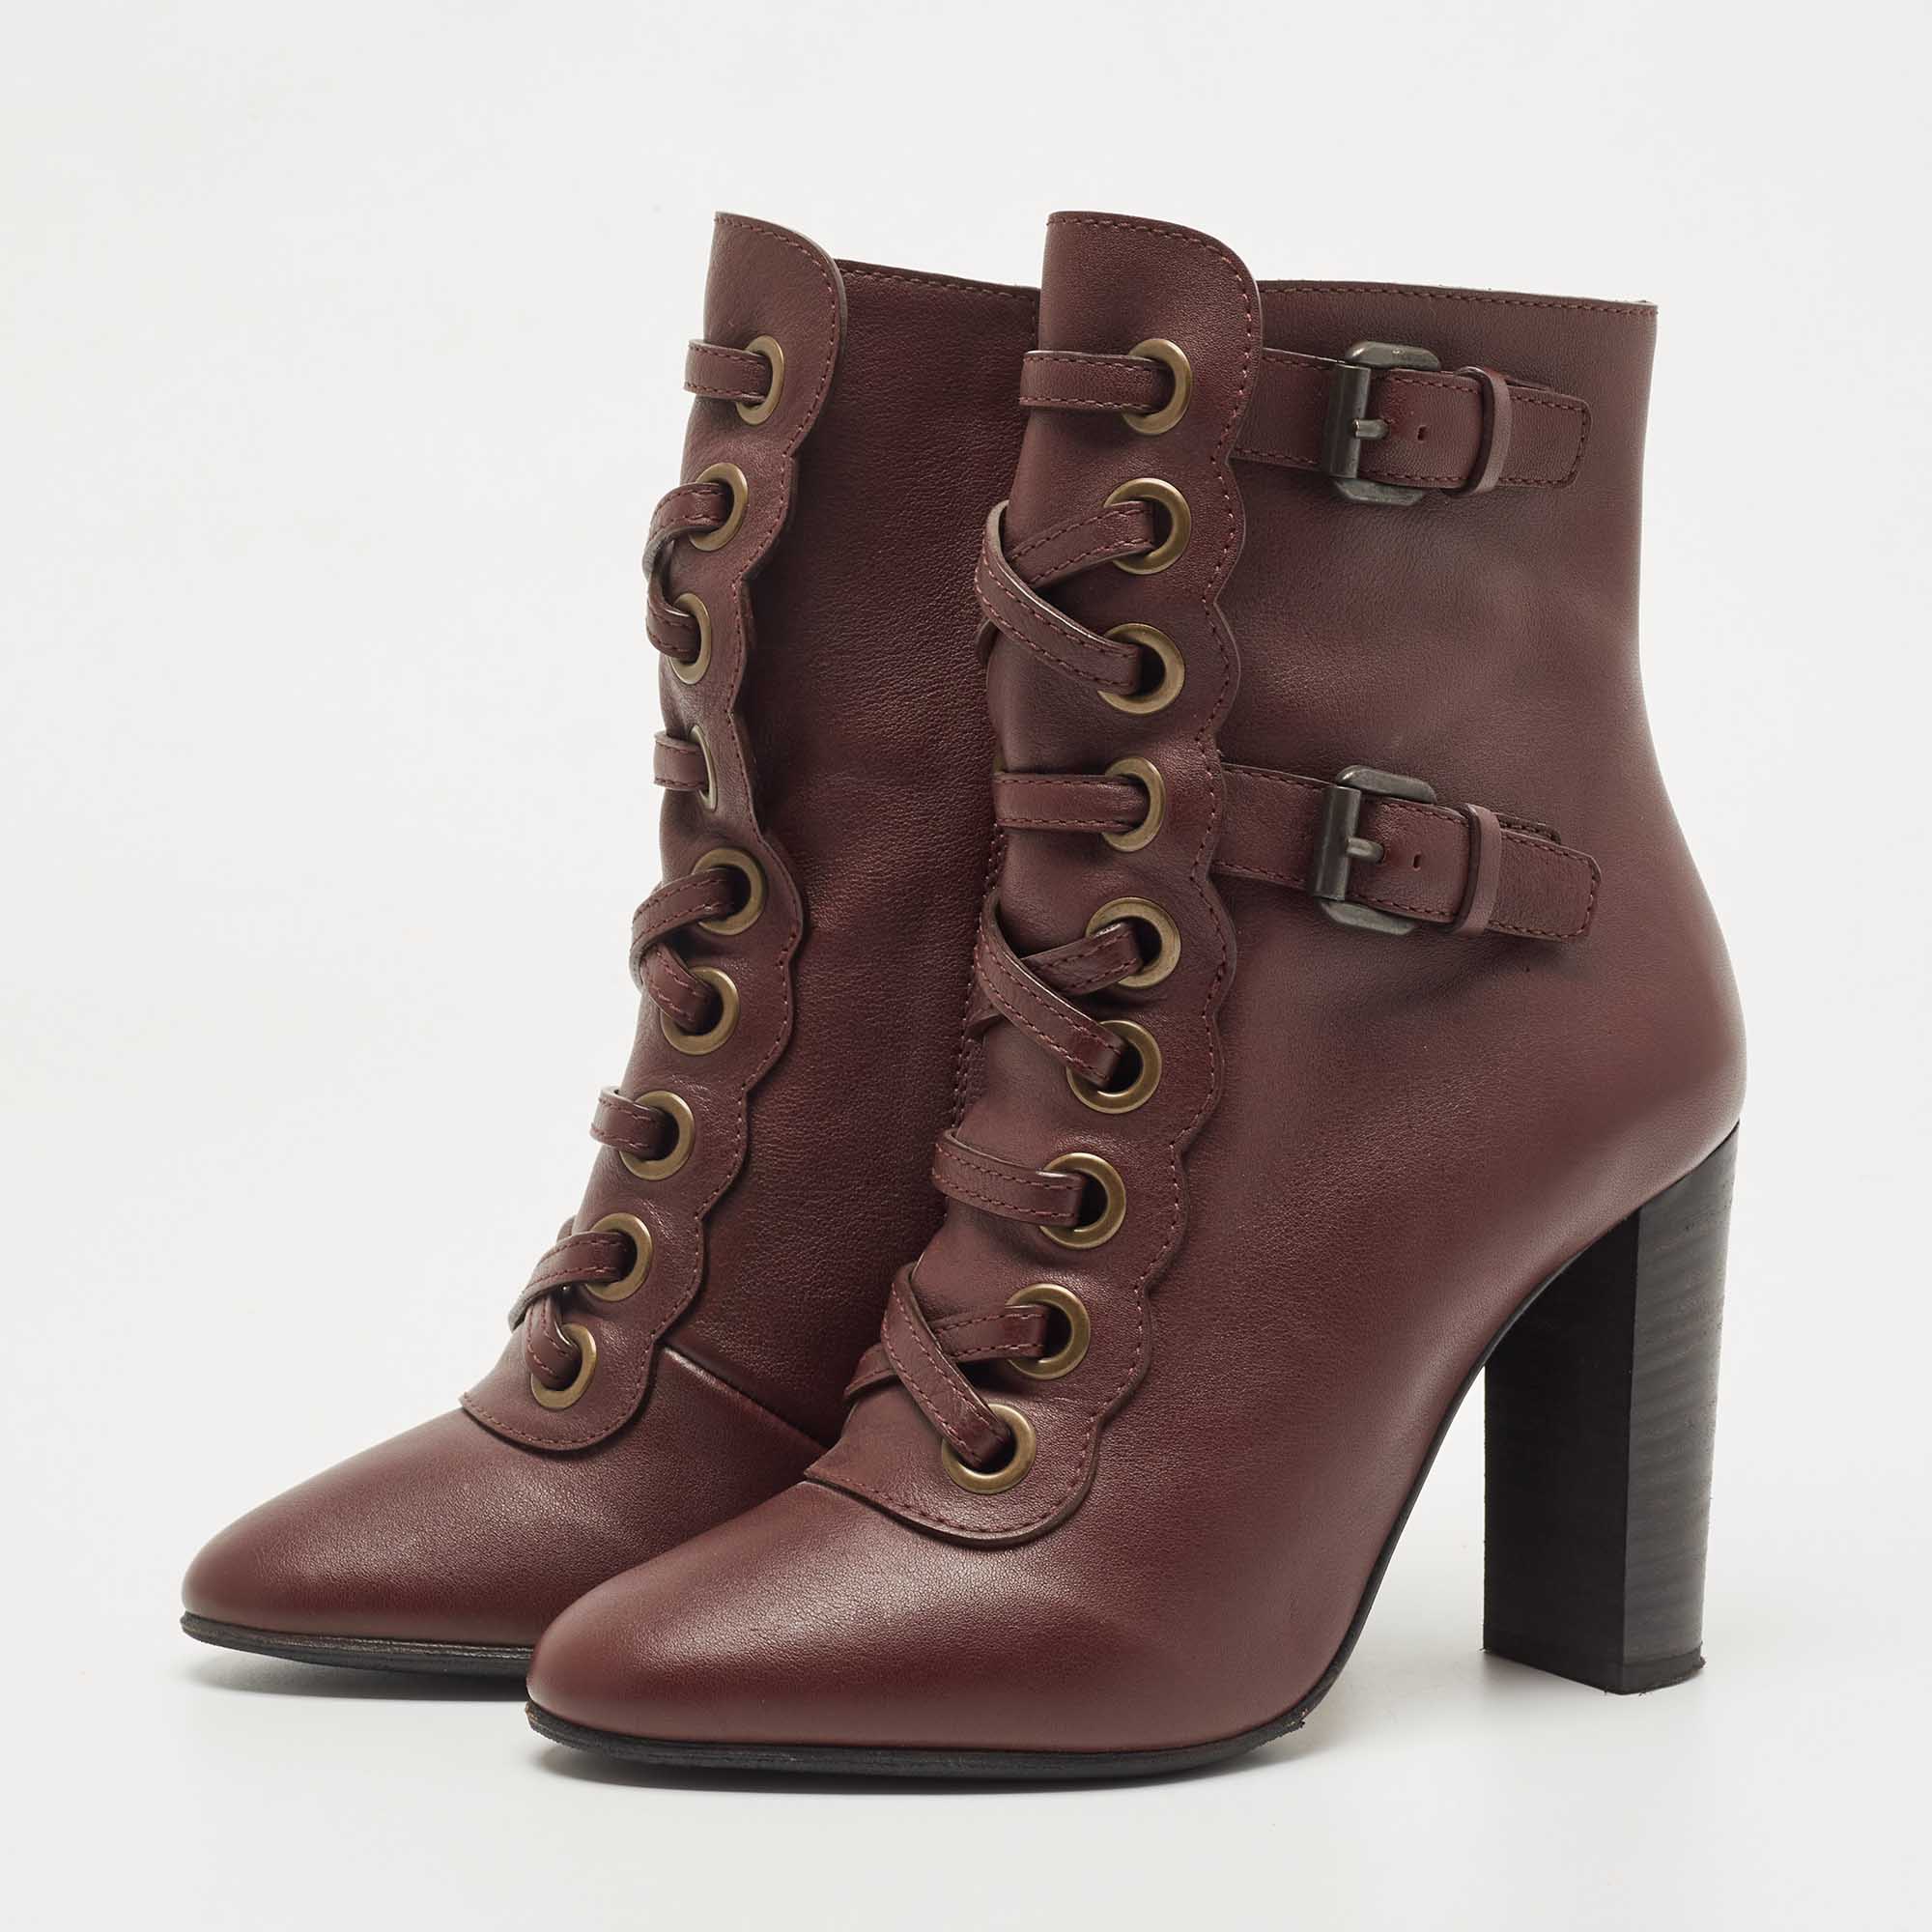 

Chloe Burgundy Leather Buckle Detail Lace Up Ankle Booties Size